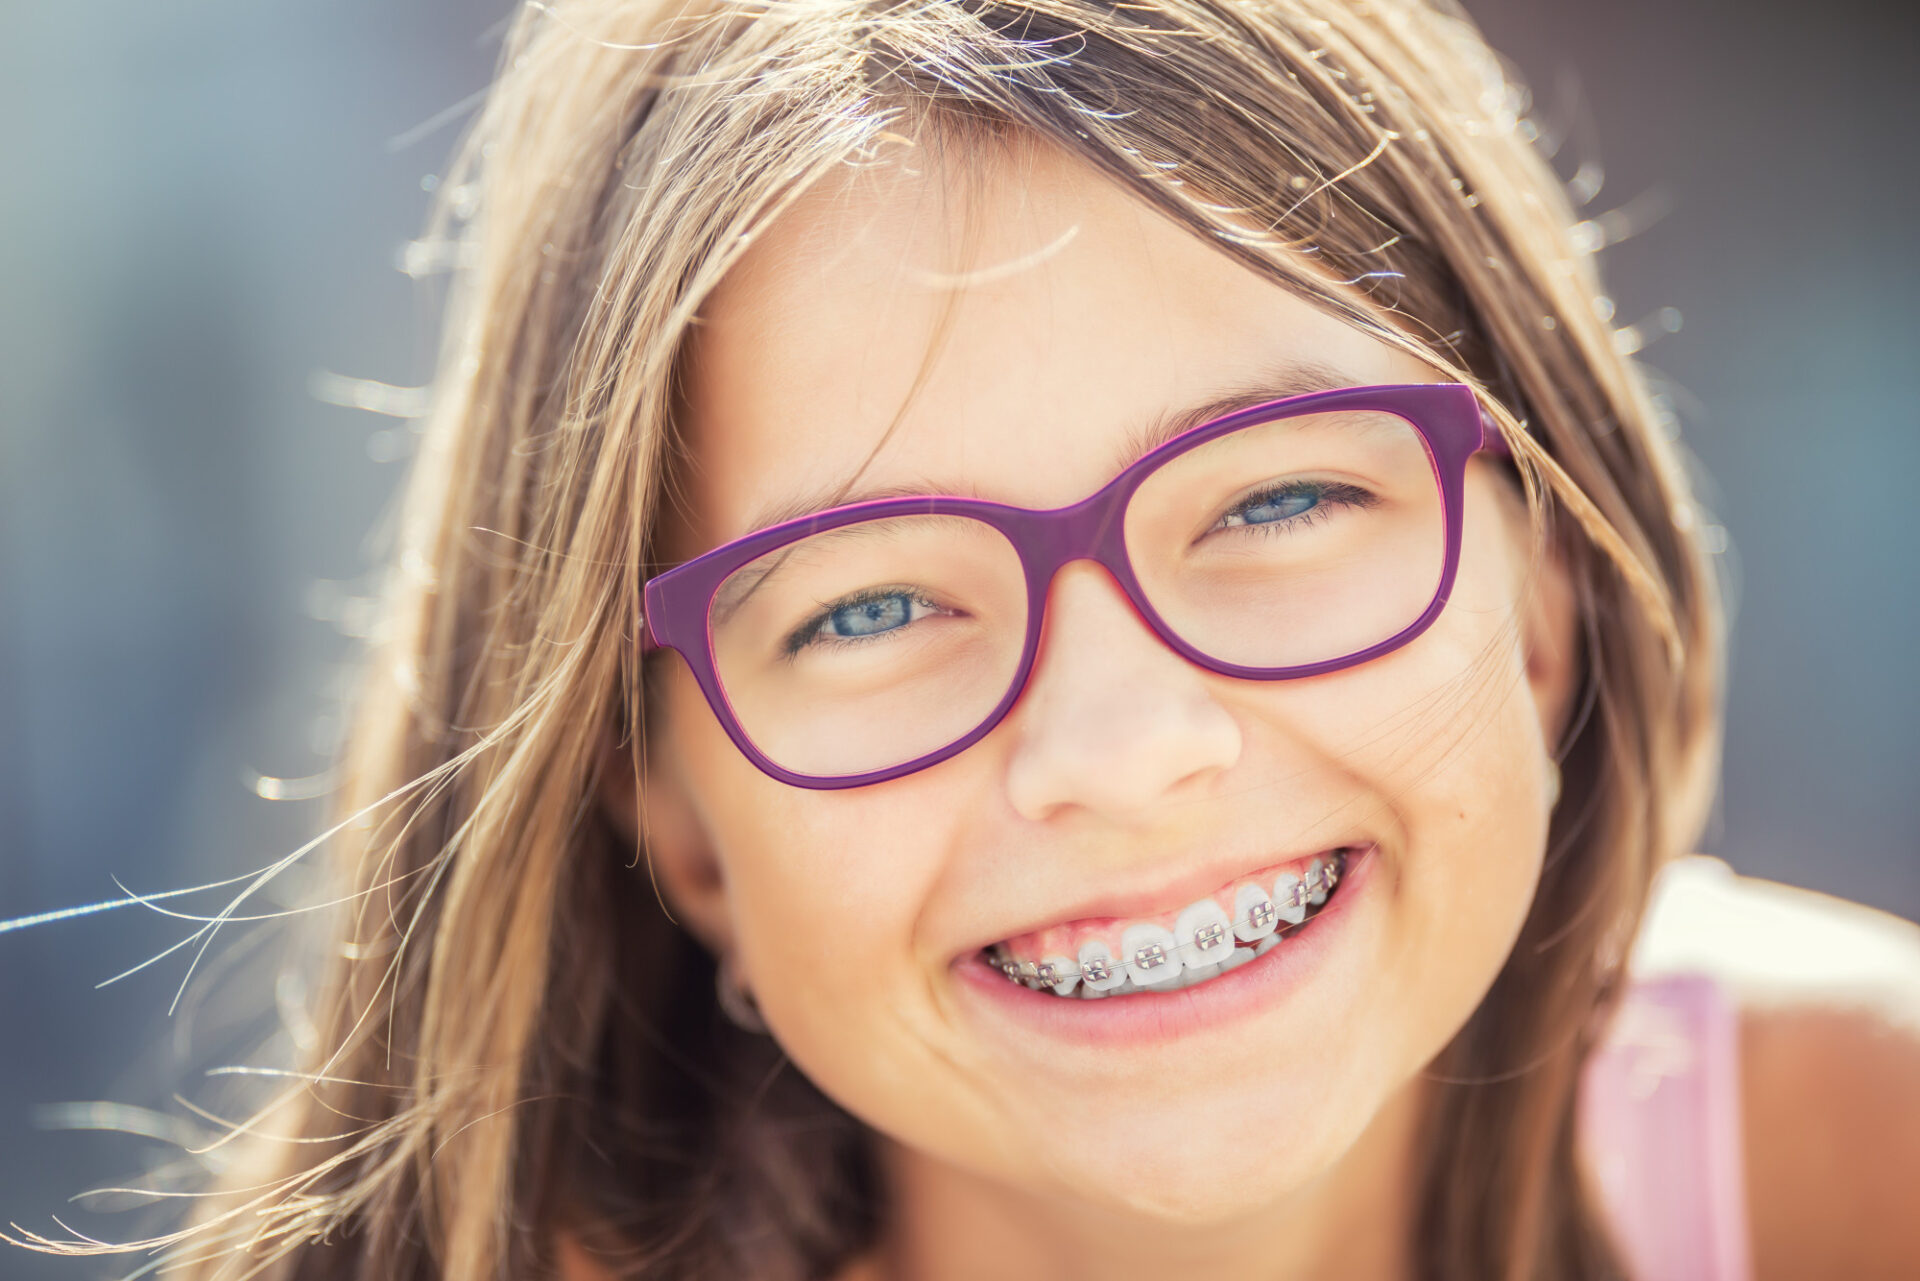 Eating With Braces 7 Dietary Tips for Children With Braces Children's Dental & Orthodontics